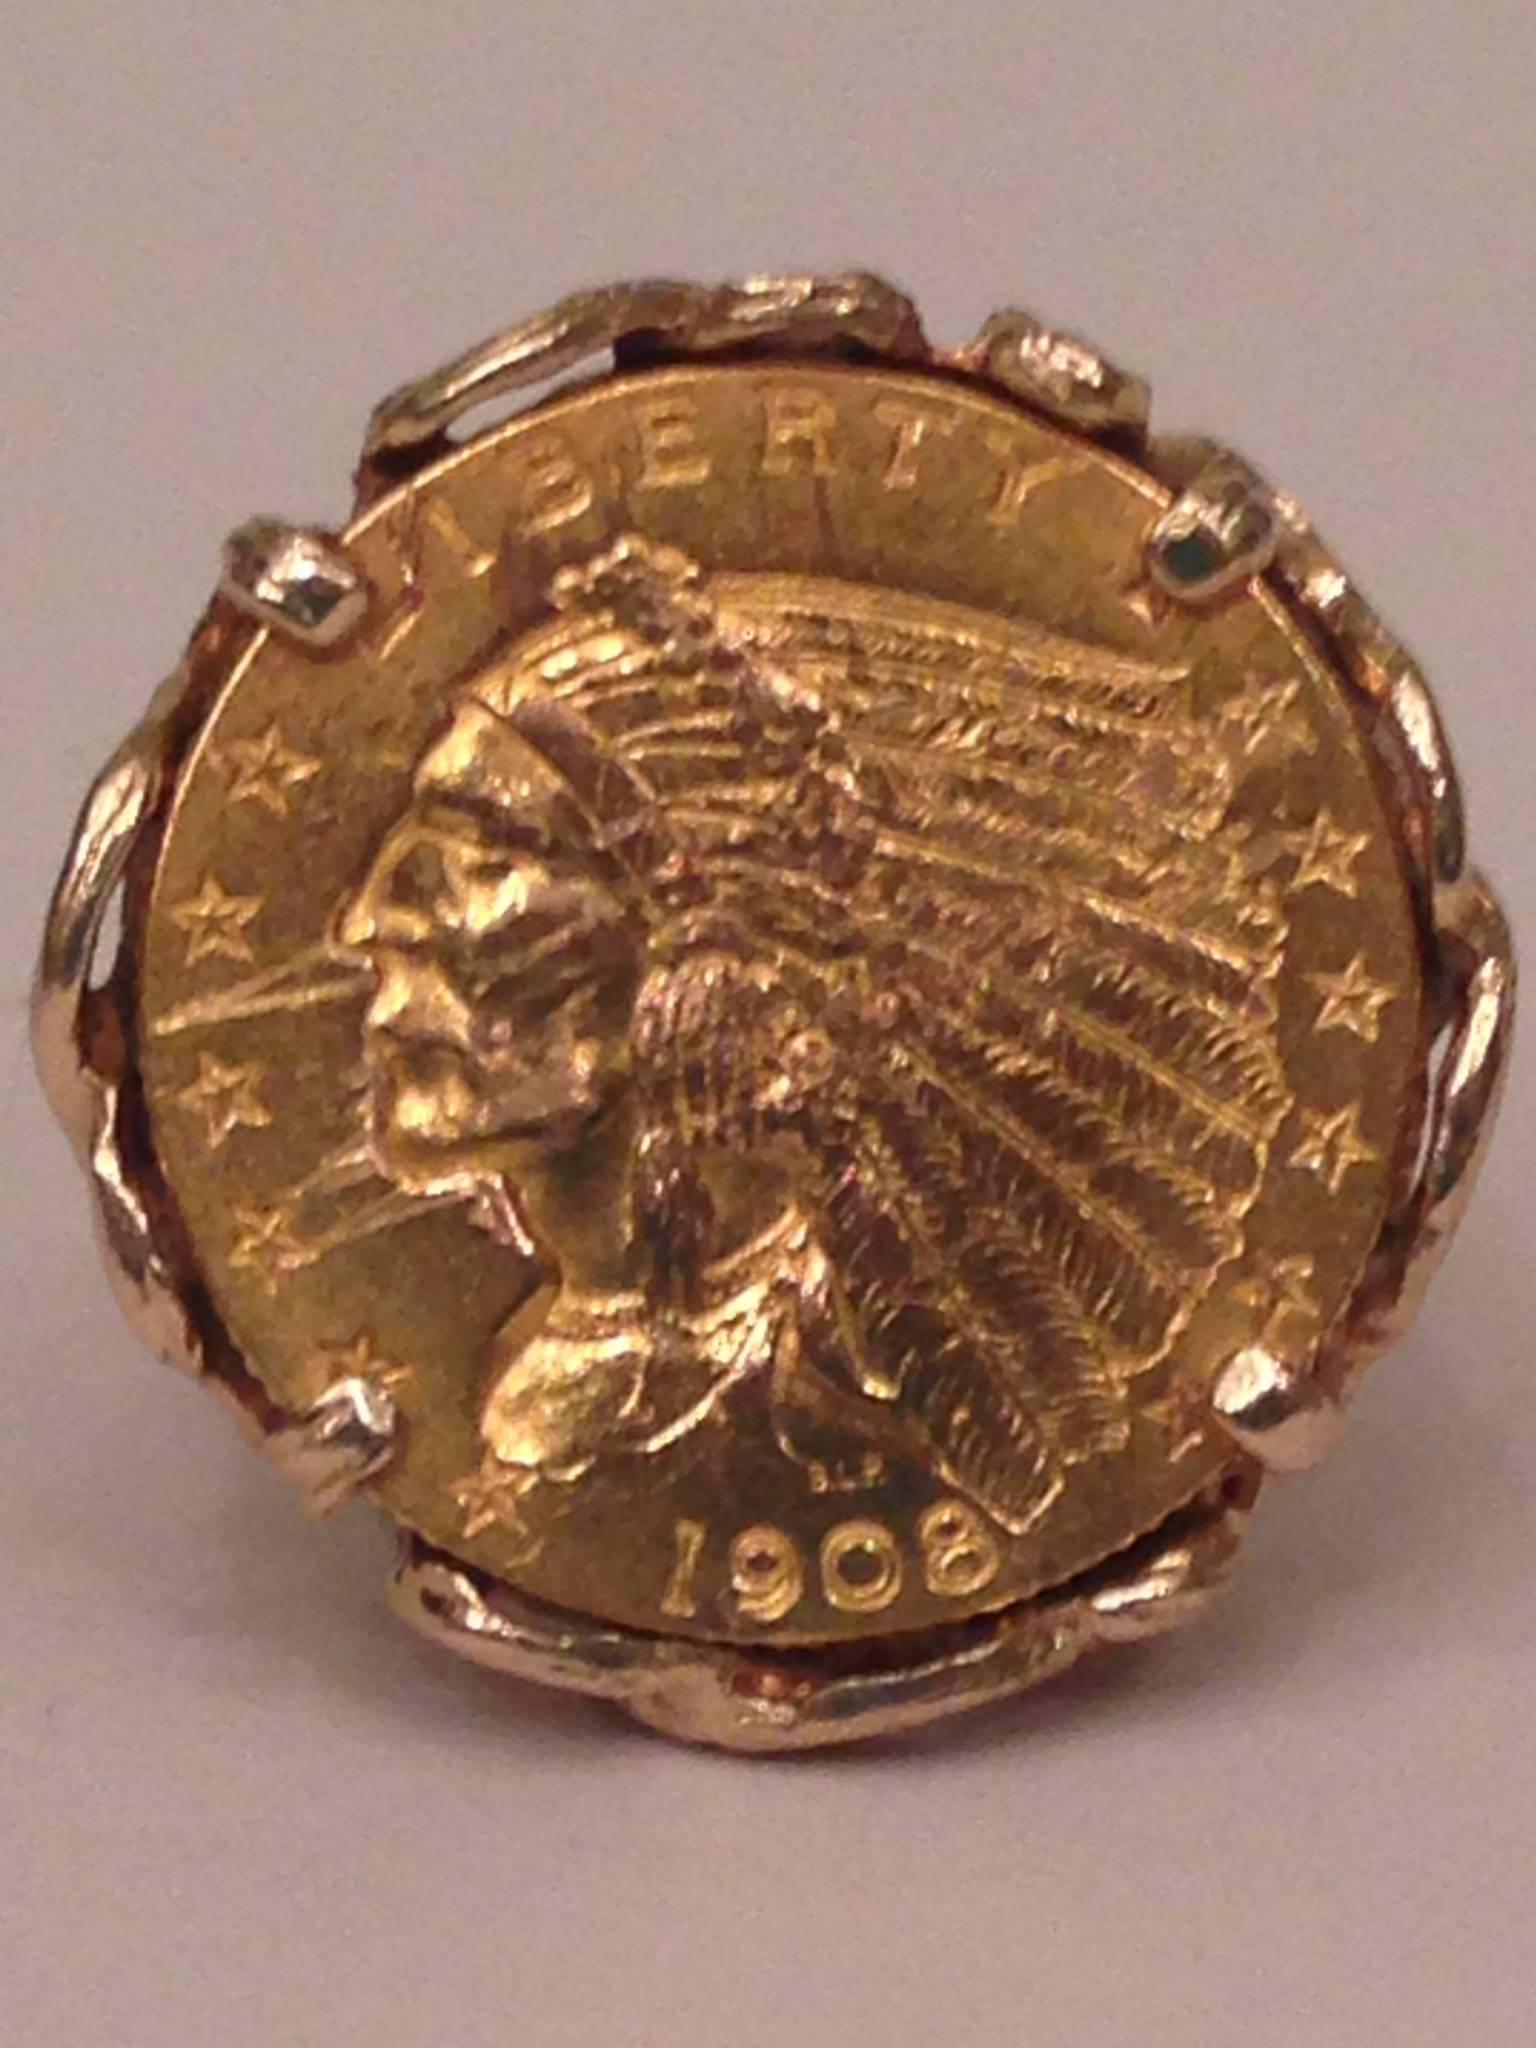 1908 Indian head Liberty gold coin set in a 14-karat yellow gold ring with latticework band. Size: 4. Total weight: 10 grams. Interior engraved stamped 14-karat with the maker initials RM. Coin, 1.75